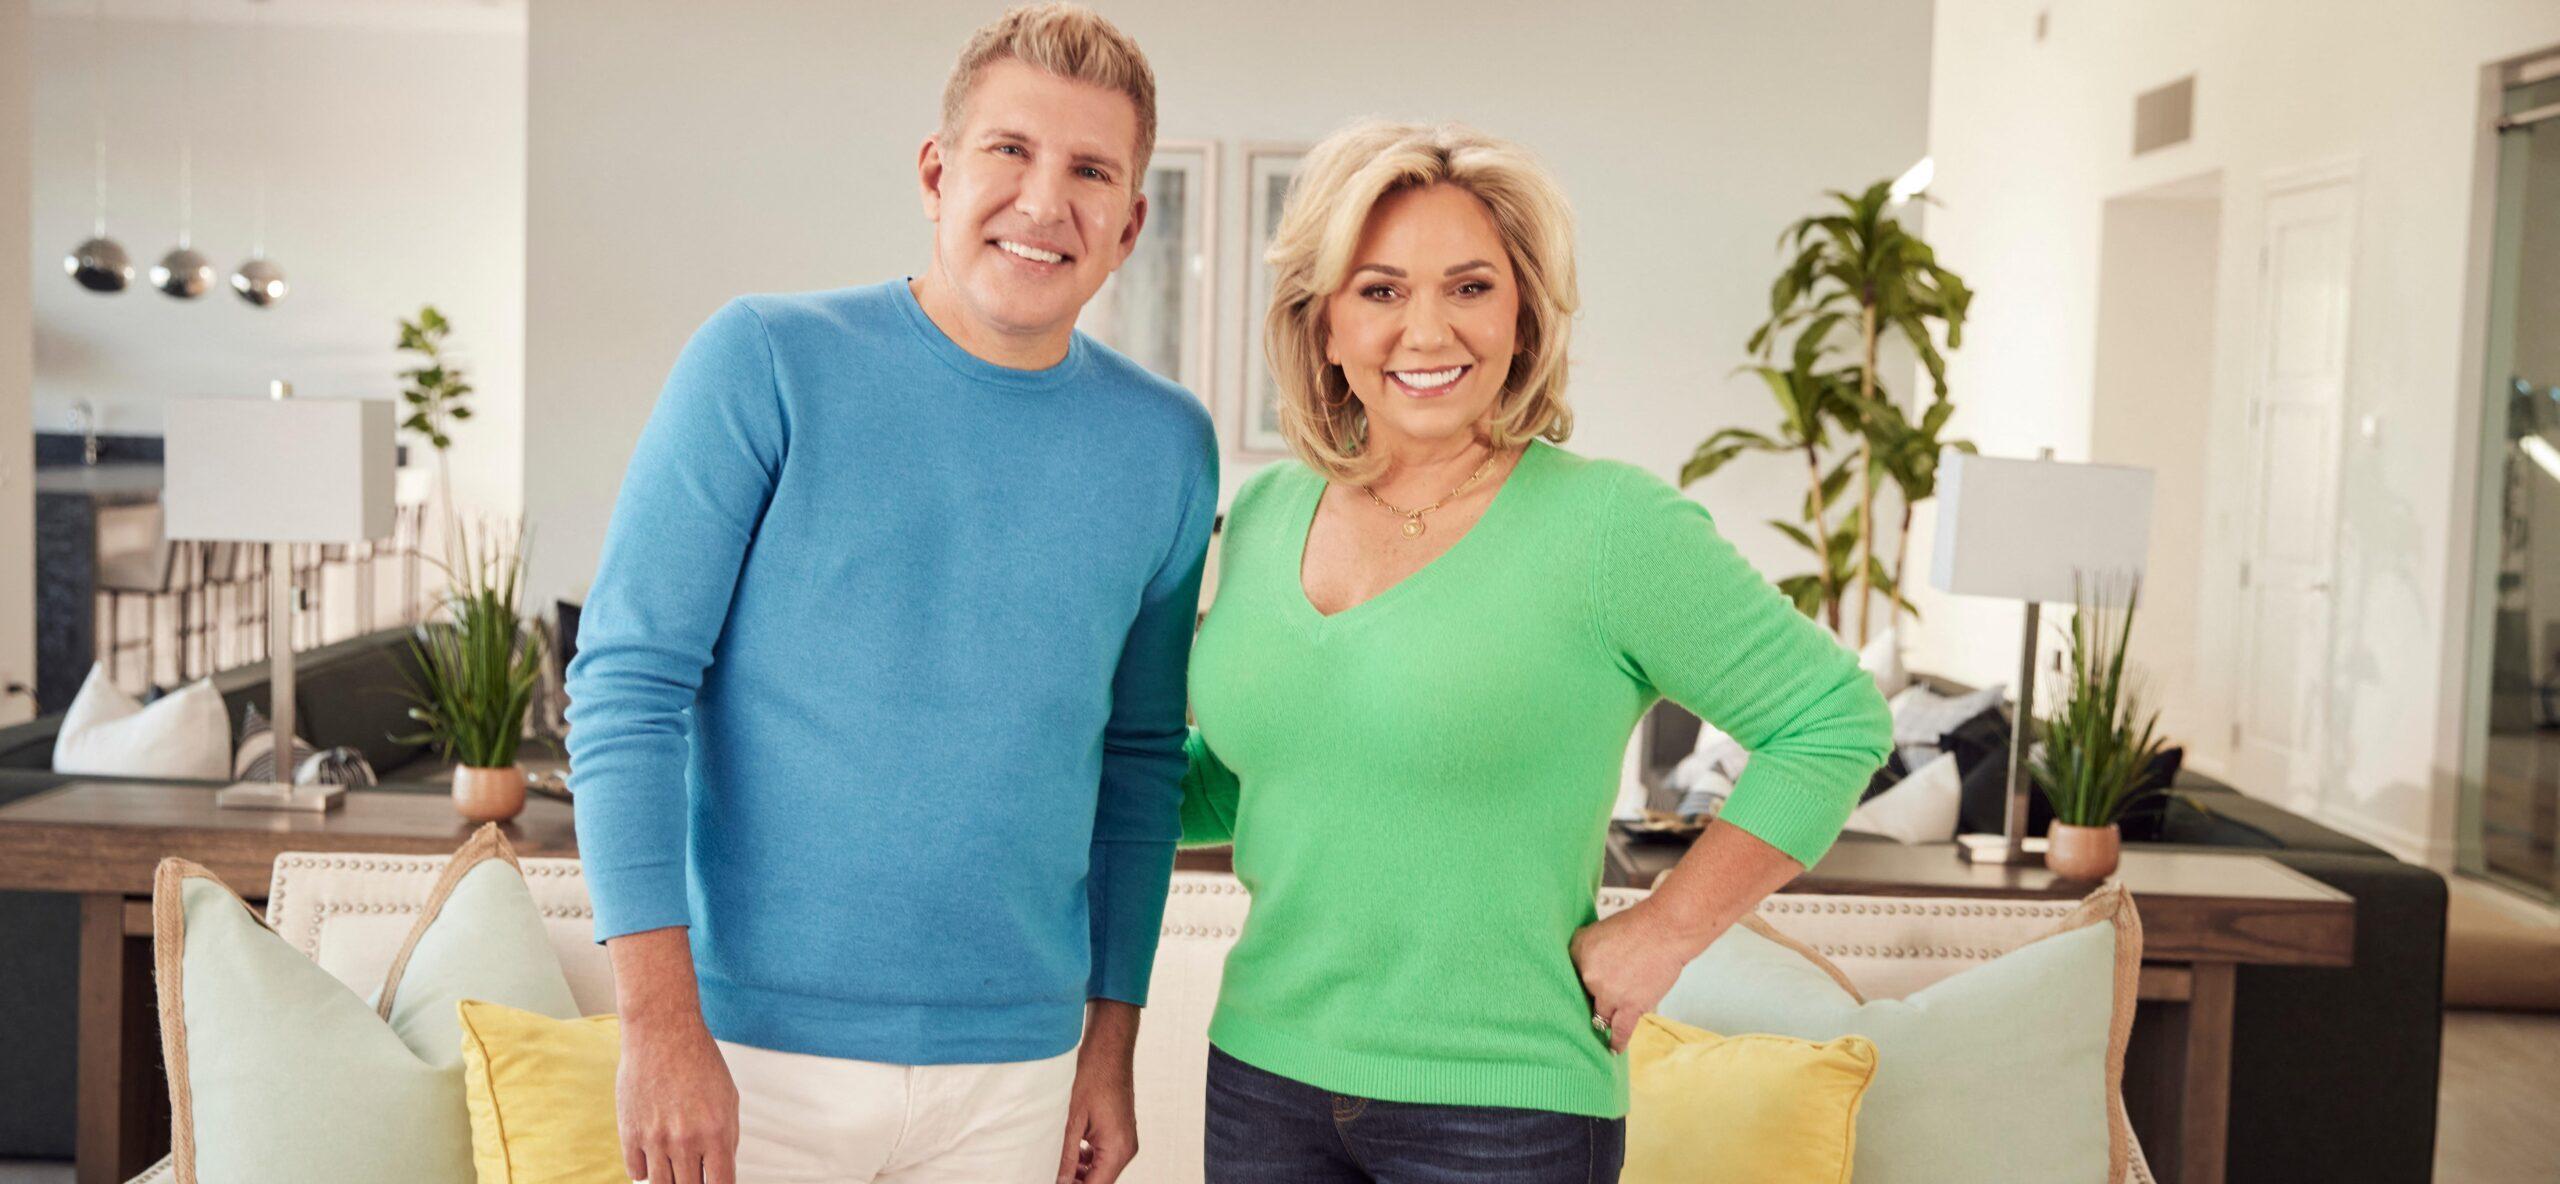 Todd amp Julie Chrisley show off their collective 40lbs weight loss in new Nutrisystem photoshoot